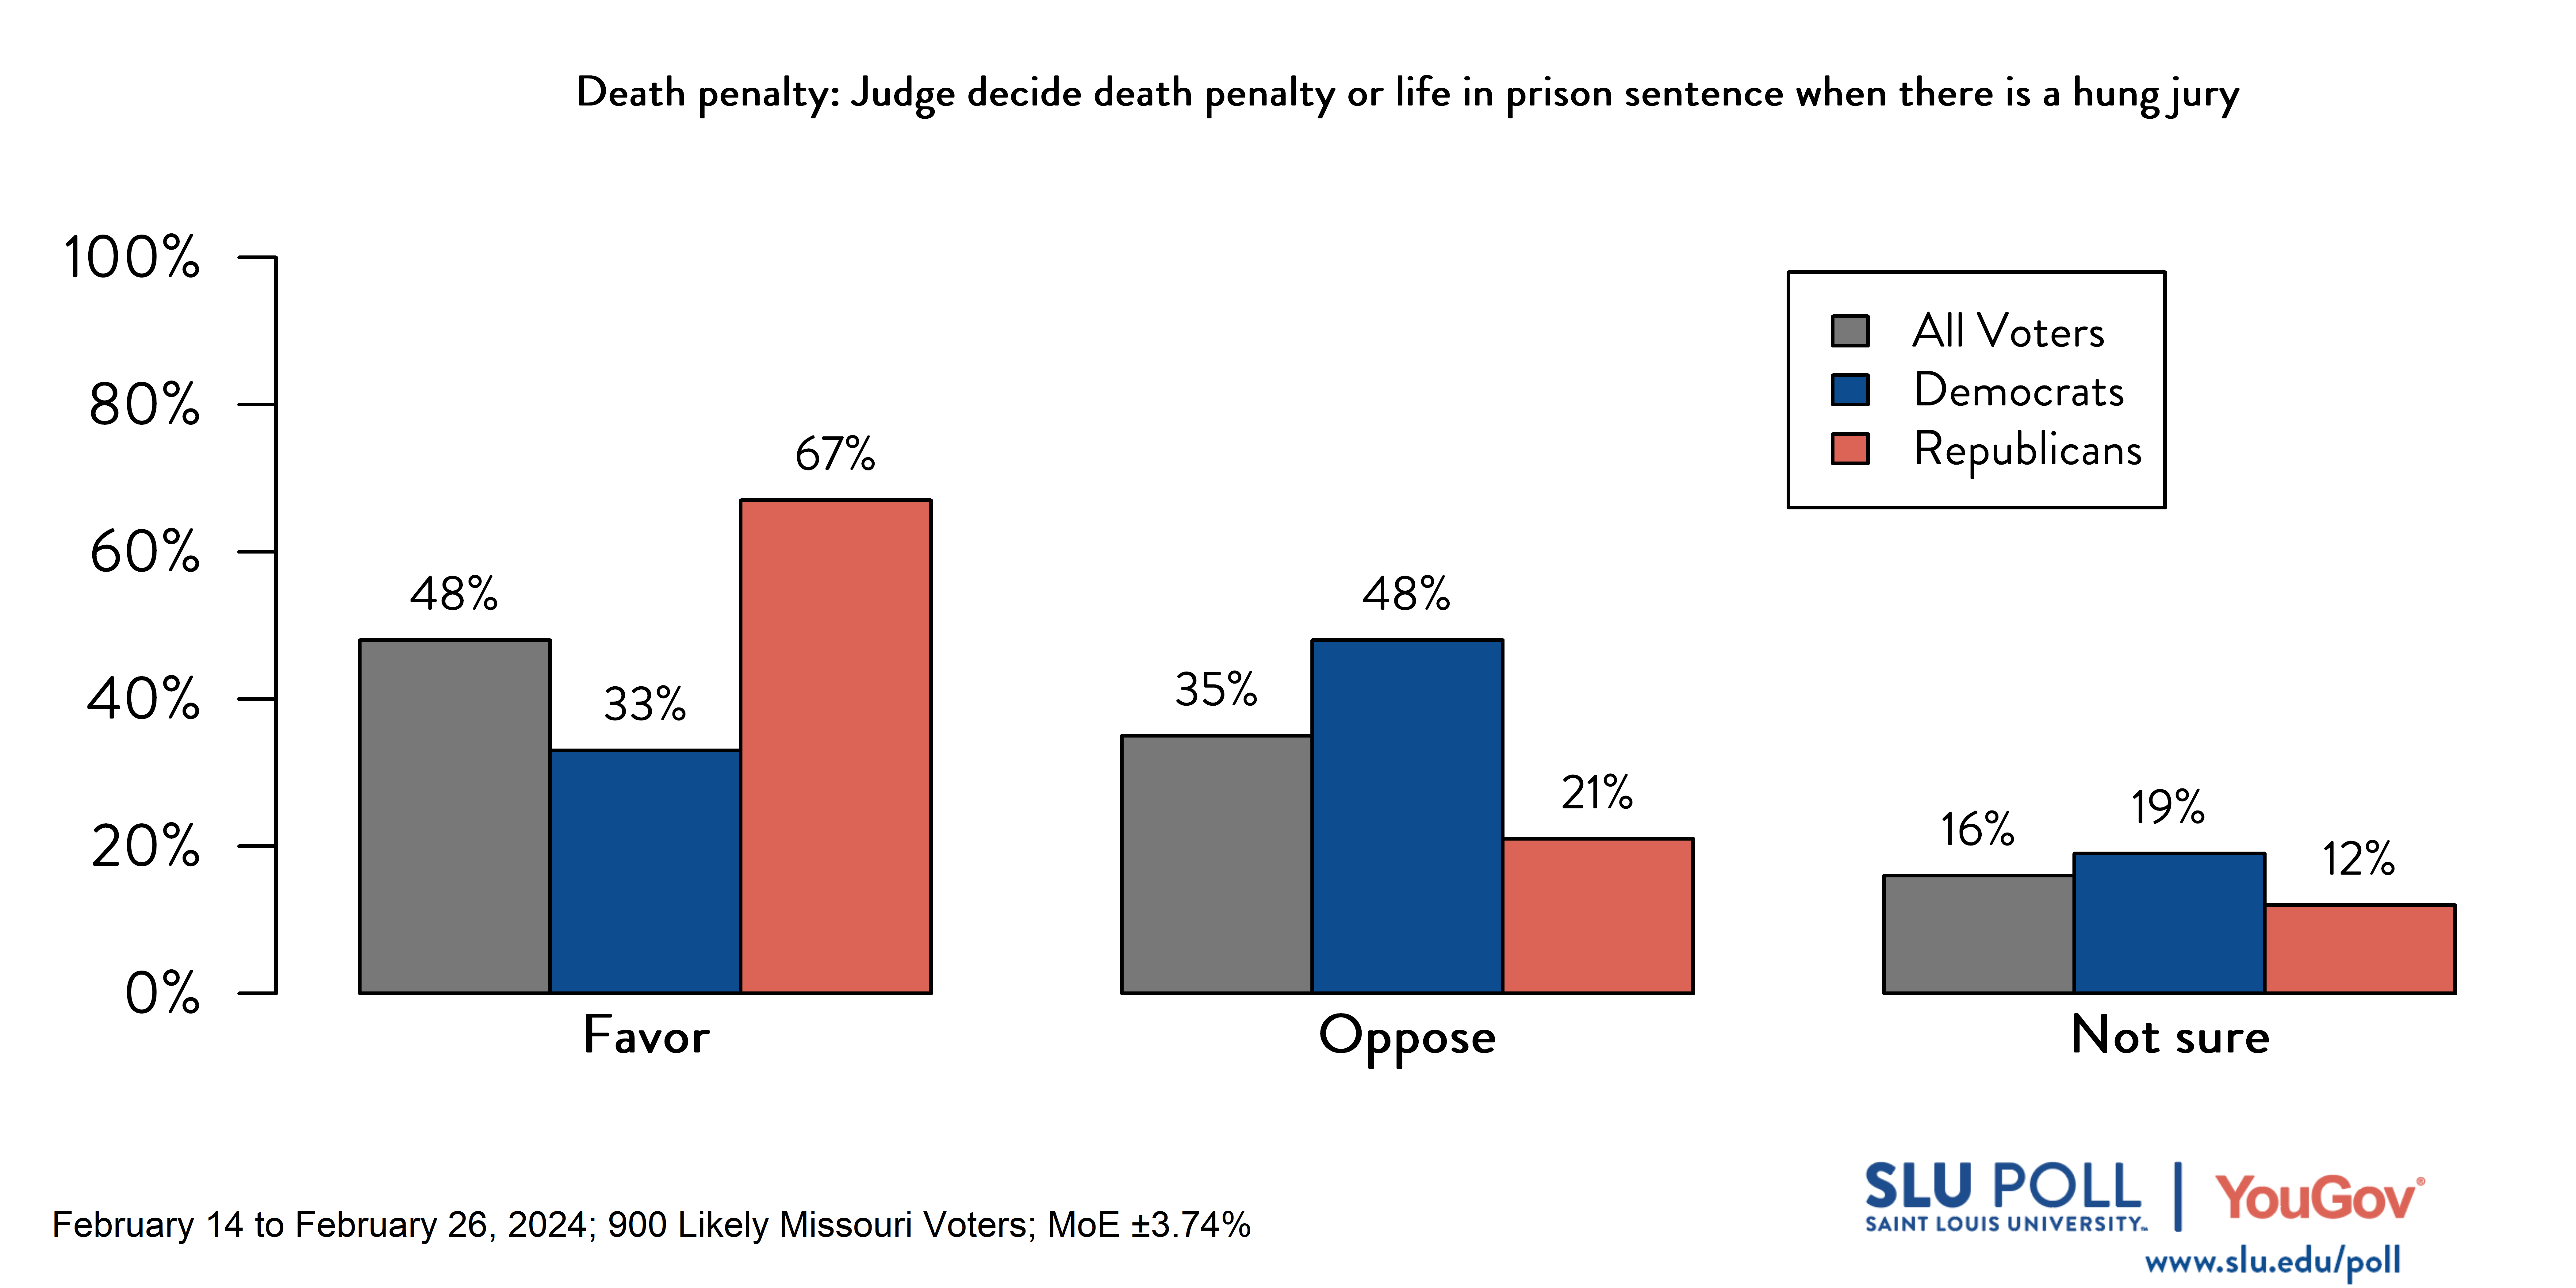 Likely voters' responses to 'Do you favor or oppose the following in the state of Missouri…When a jury cannot unanimously agree to sentence the death penalty, the judge decides whether to sentence the death penalty or life in prison without parole?': 48% Favor, 35% Oppose, and 16% Not Sure. Democratic voters' responses: ' 33% Favor, 48% Oppose, and 19% Not Sure. Republican voters' responses:  67% Favor, 21% Oppose, and 12% Not Sure.